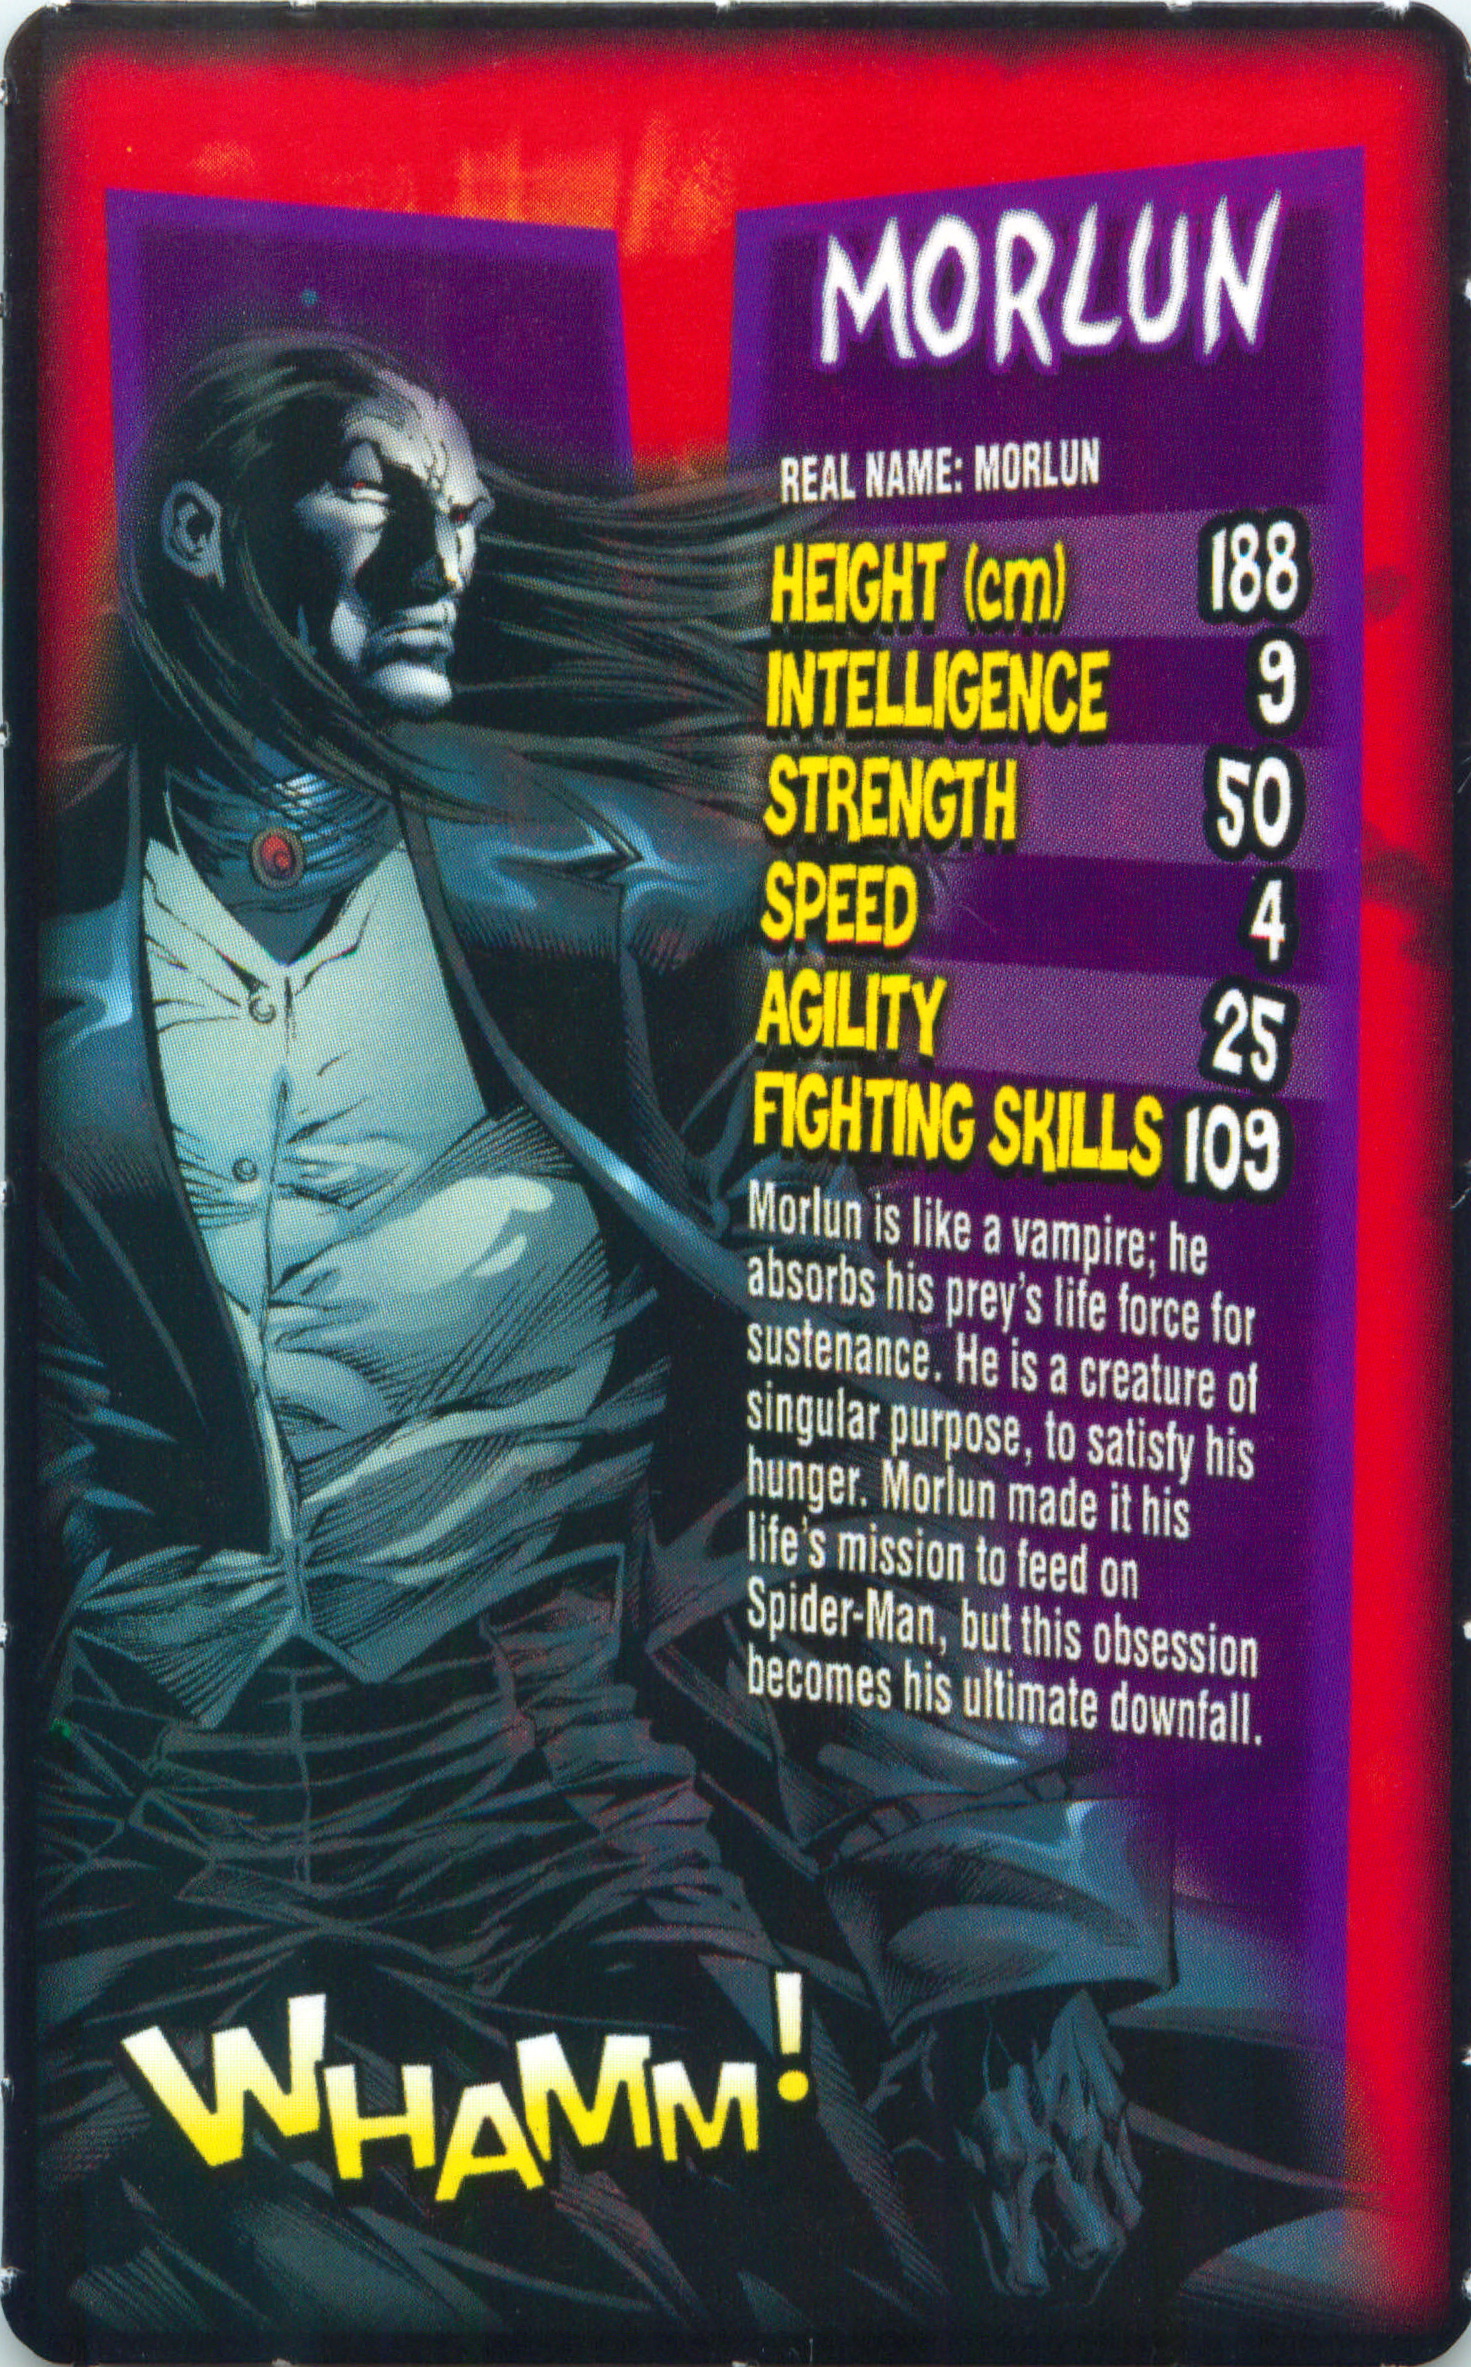 an image of a card with the character morln